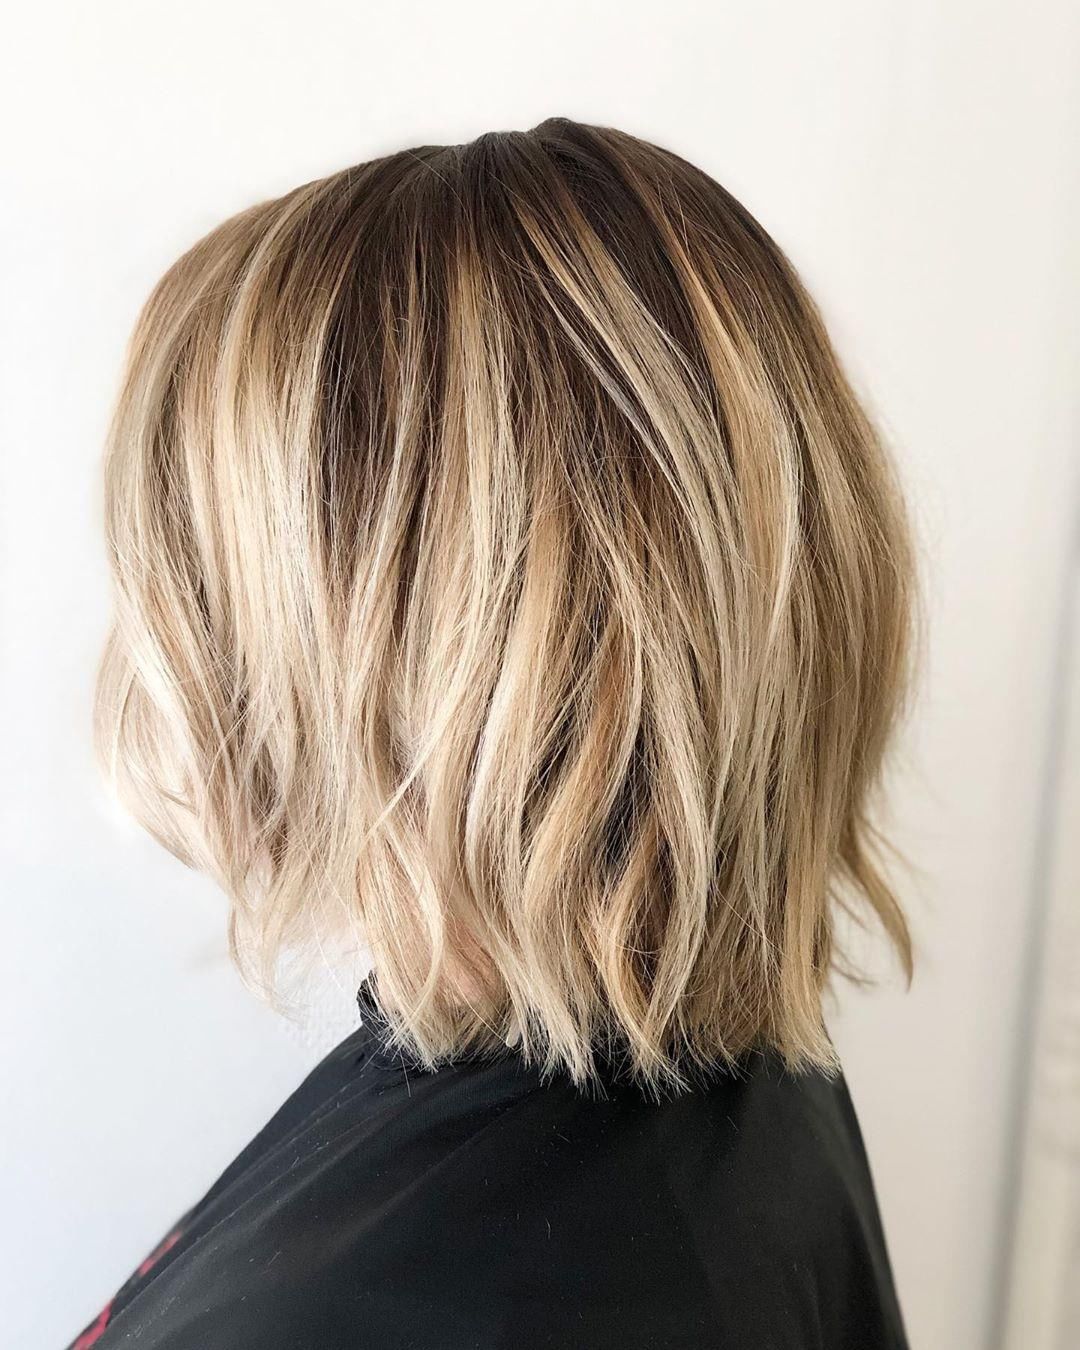 Schwarzkopf Professional - What a transformation! 🤩
*FORMULA* via @hairbylinnsala 👉 Lifted with #BLONDME and coloured with #IGORAROYAL in 6-1 + 6-4 + with 10 Vol. Toning with #IGORAVIBRANCE 9.5-5 + 9....